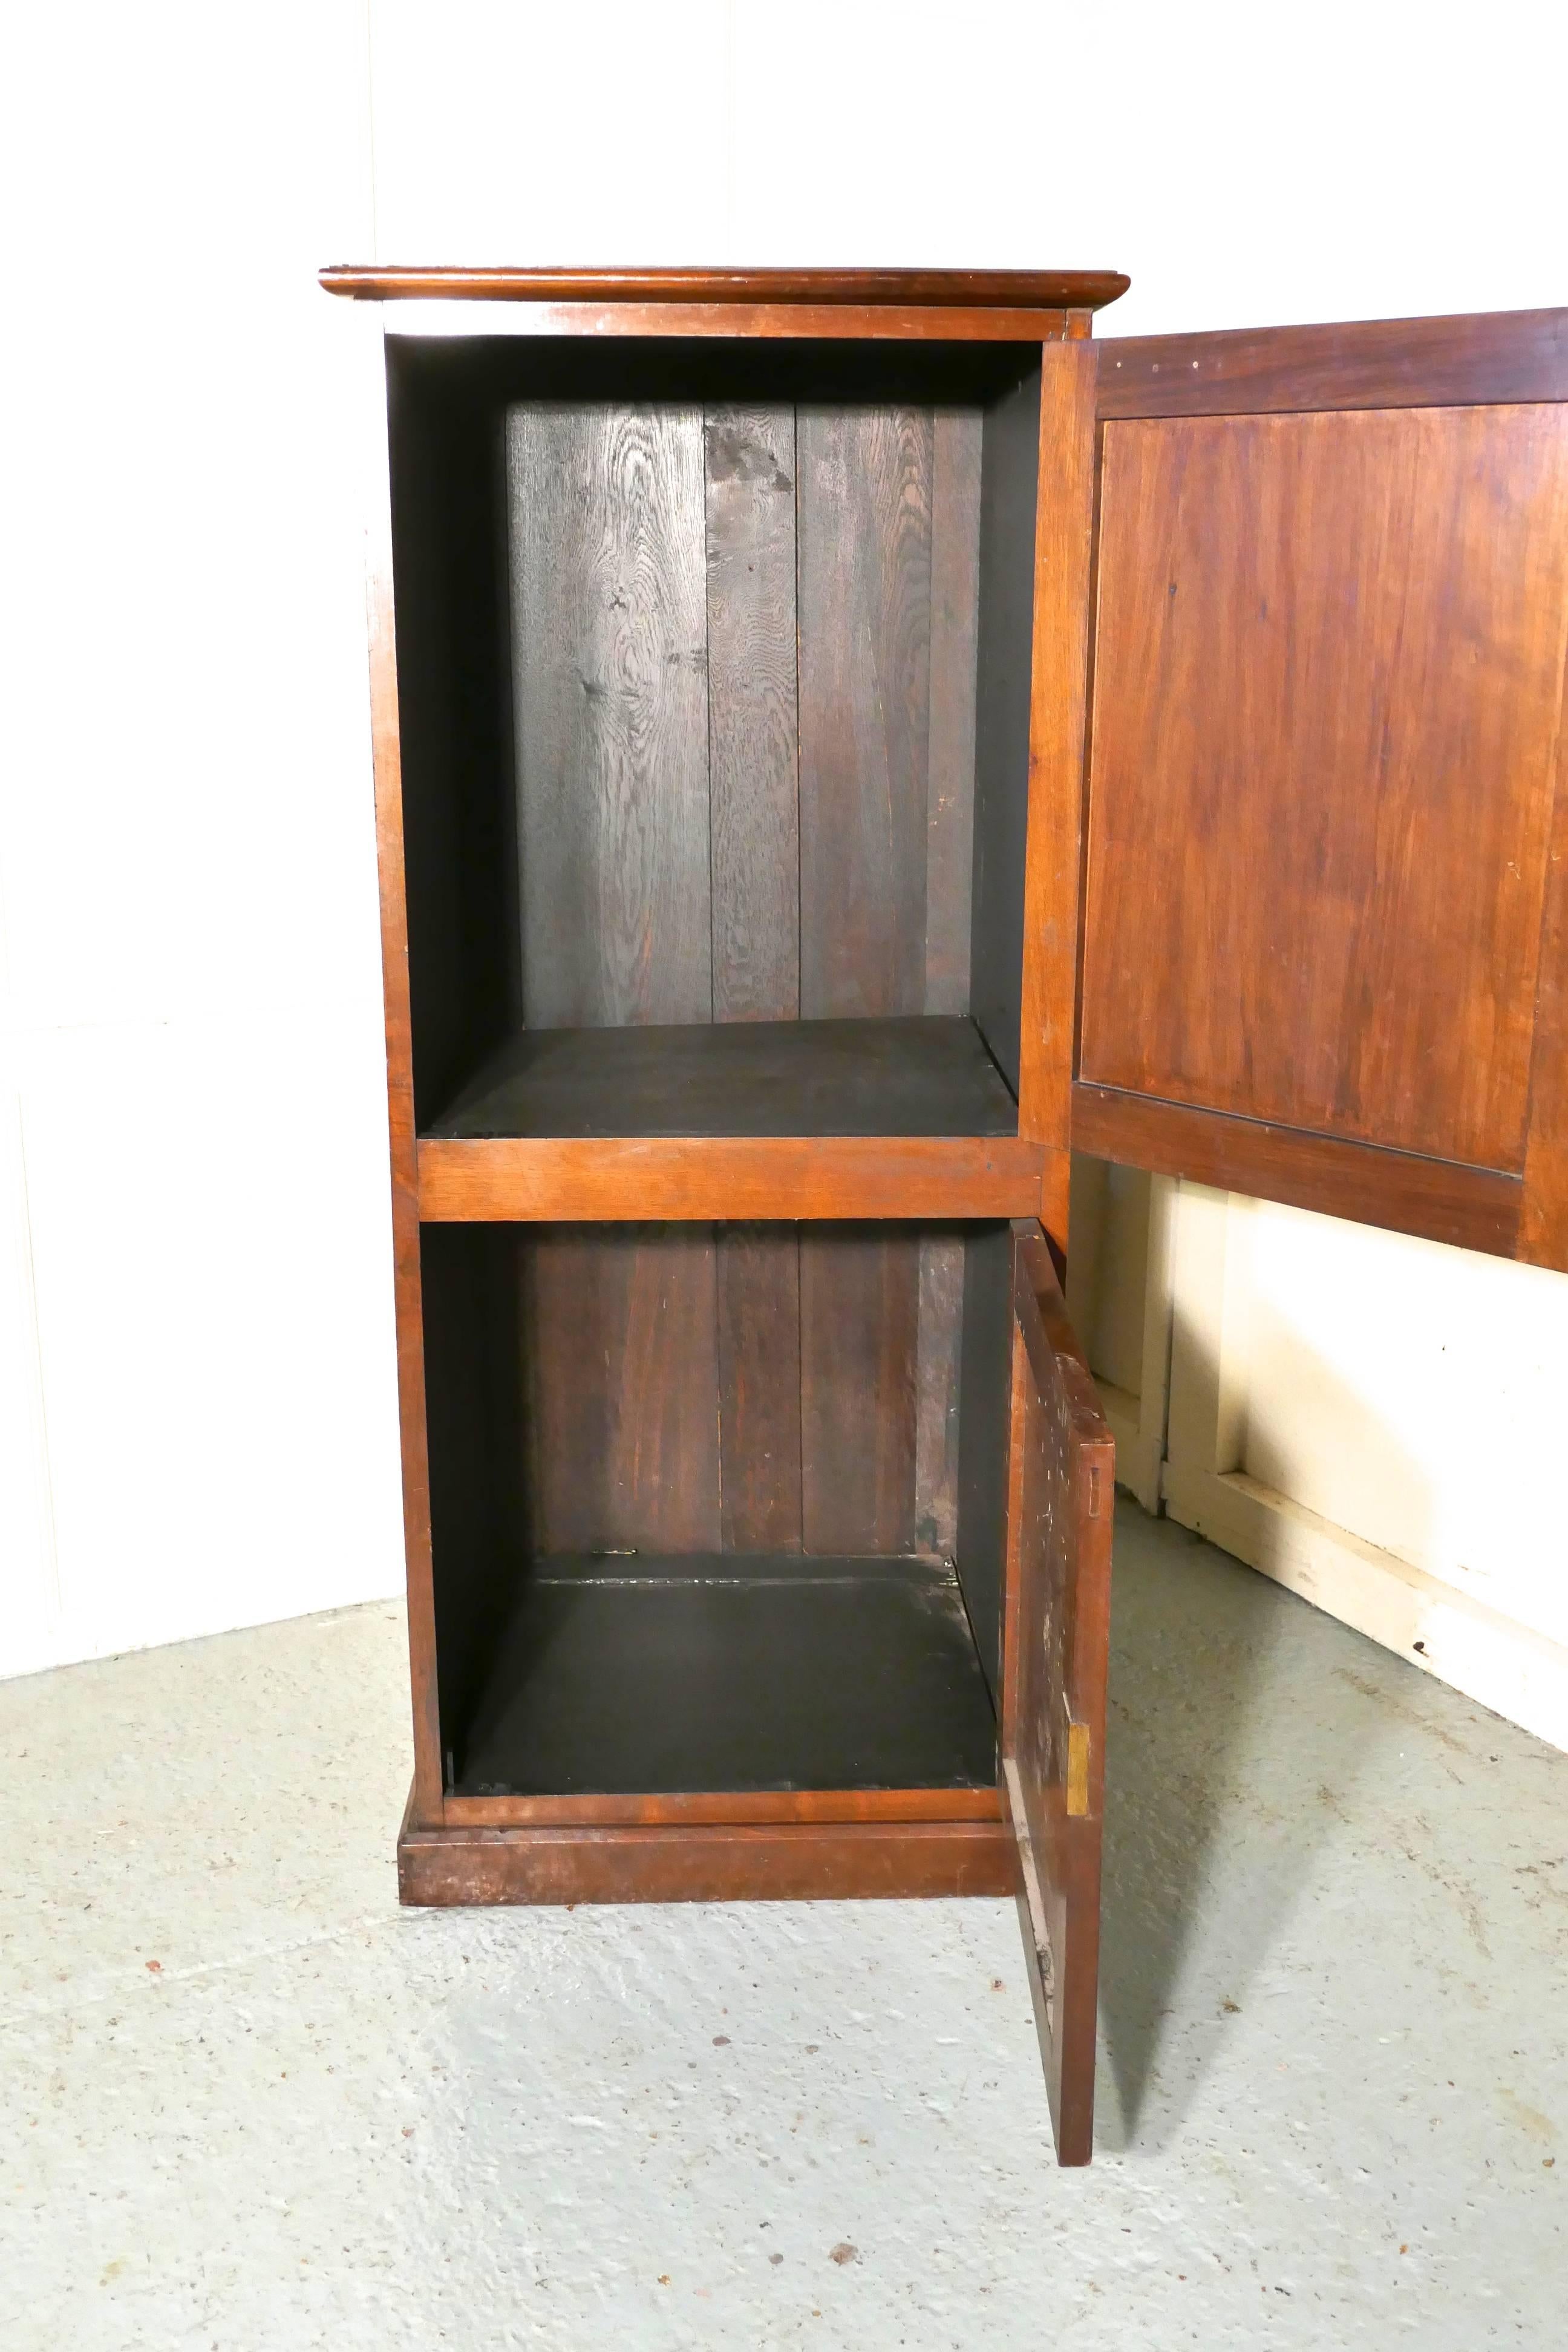 Girton and Newham hall book cupboard from Cambridge University

A hall book cupboard from Cambridge University, the cupboard has two panelled doors with graduate names from both Girton and Newham Colleges and dating from 1902 in gold on the